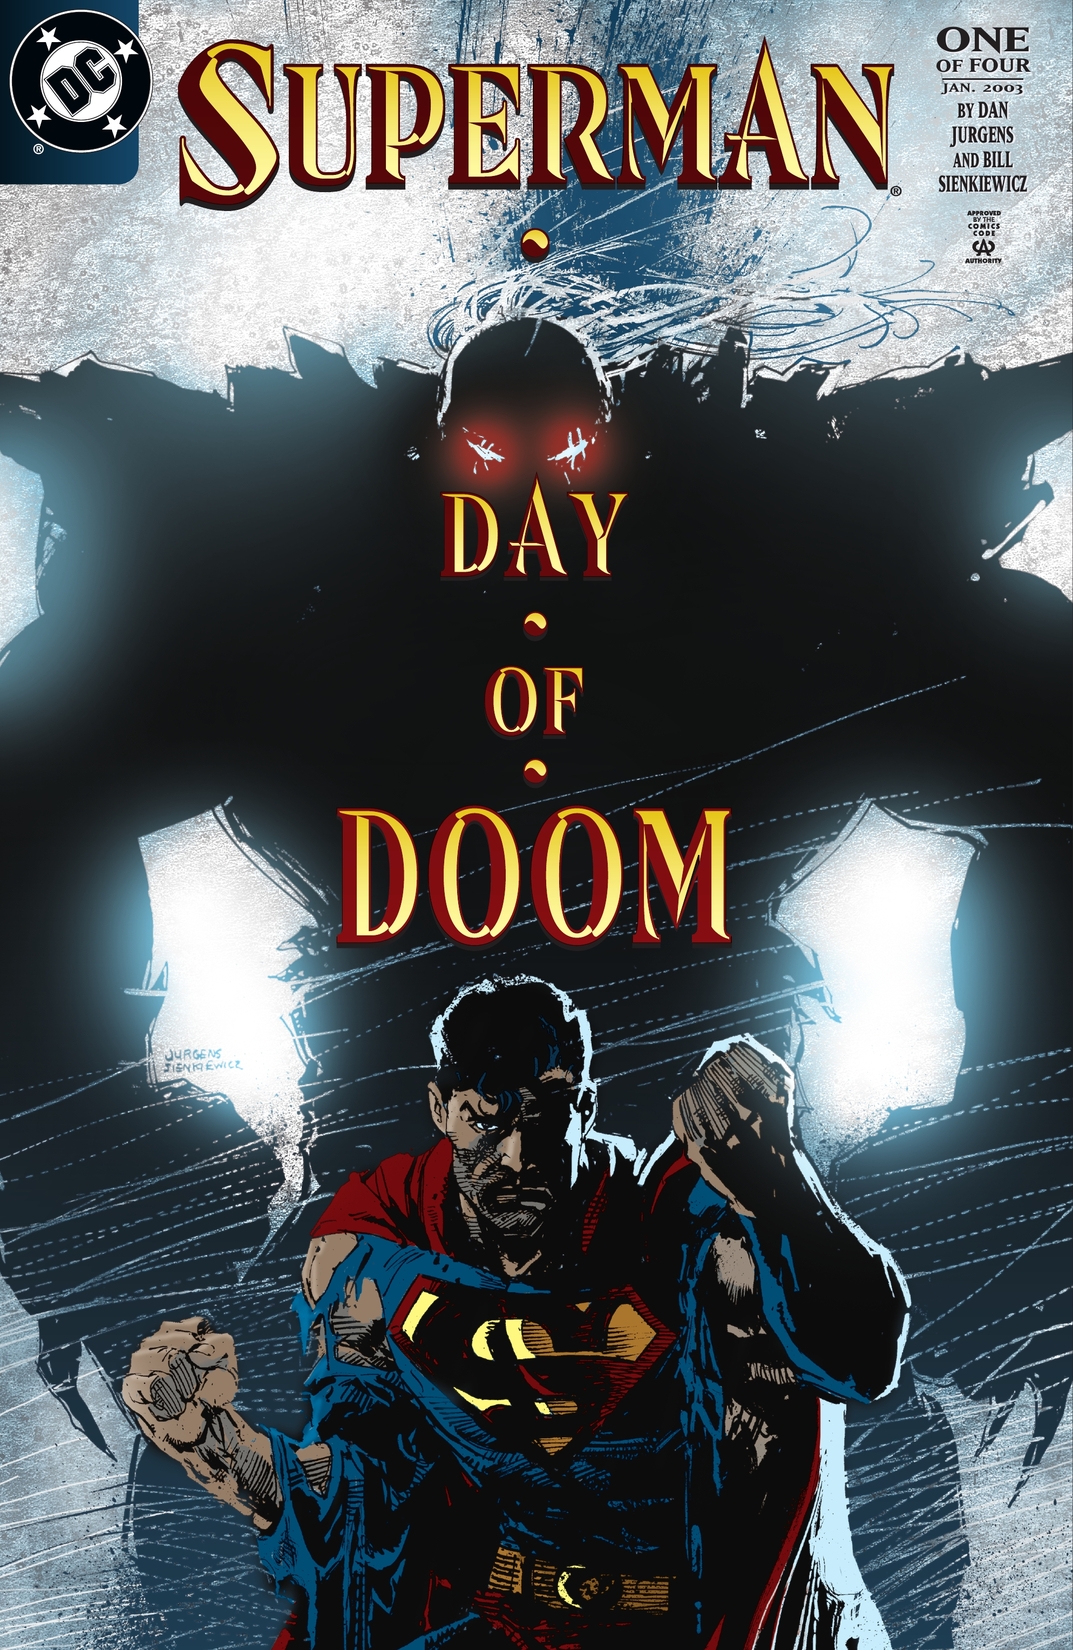 Superman: Day of Doom #1 preview images